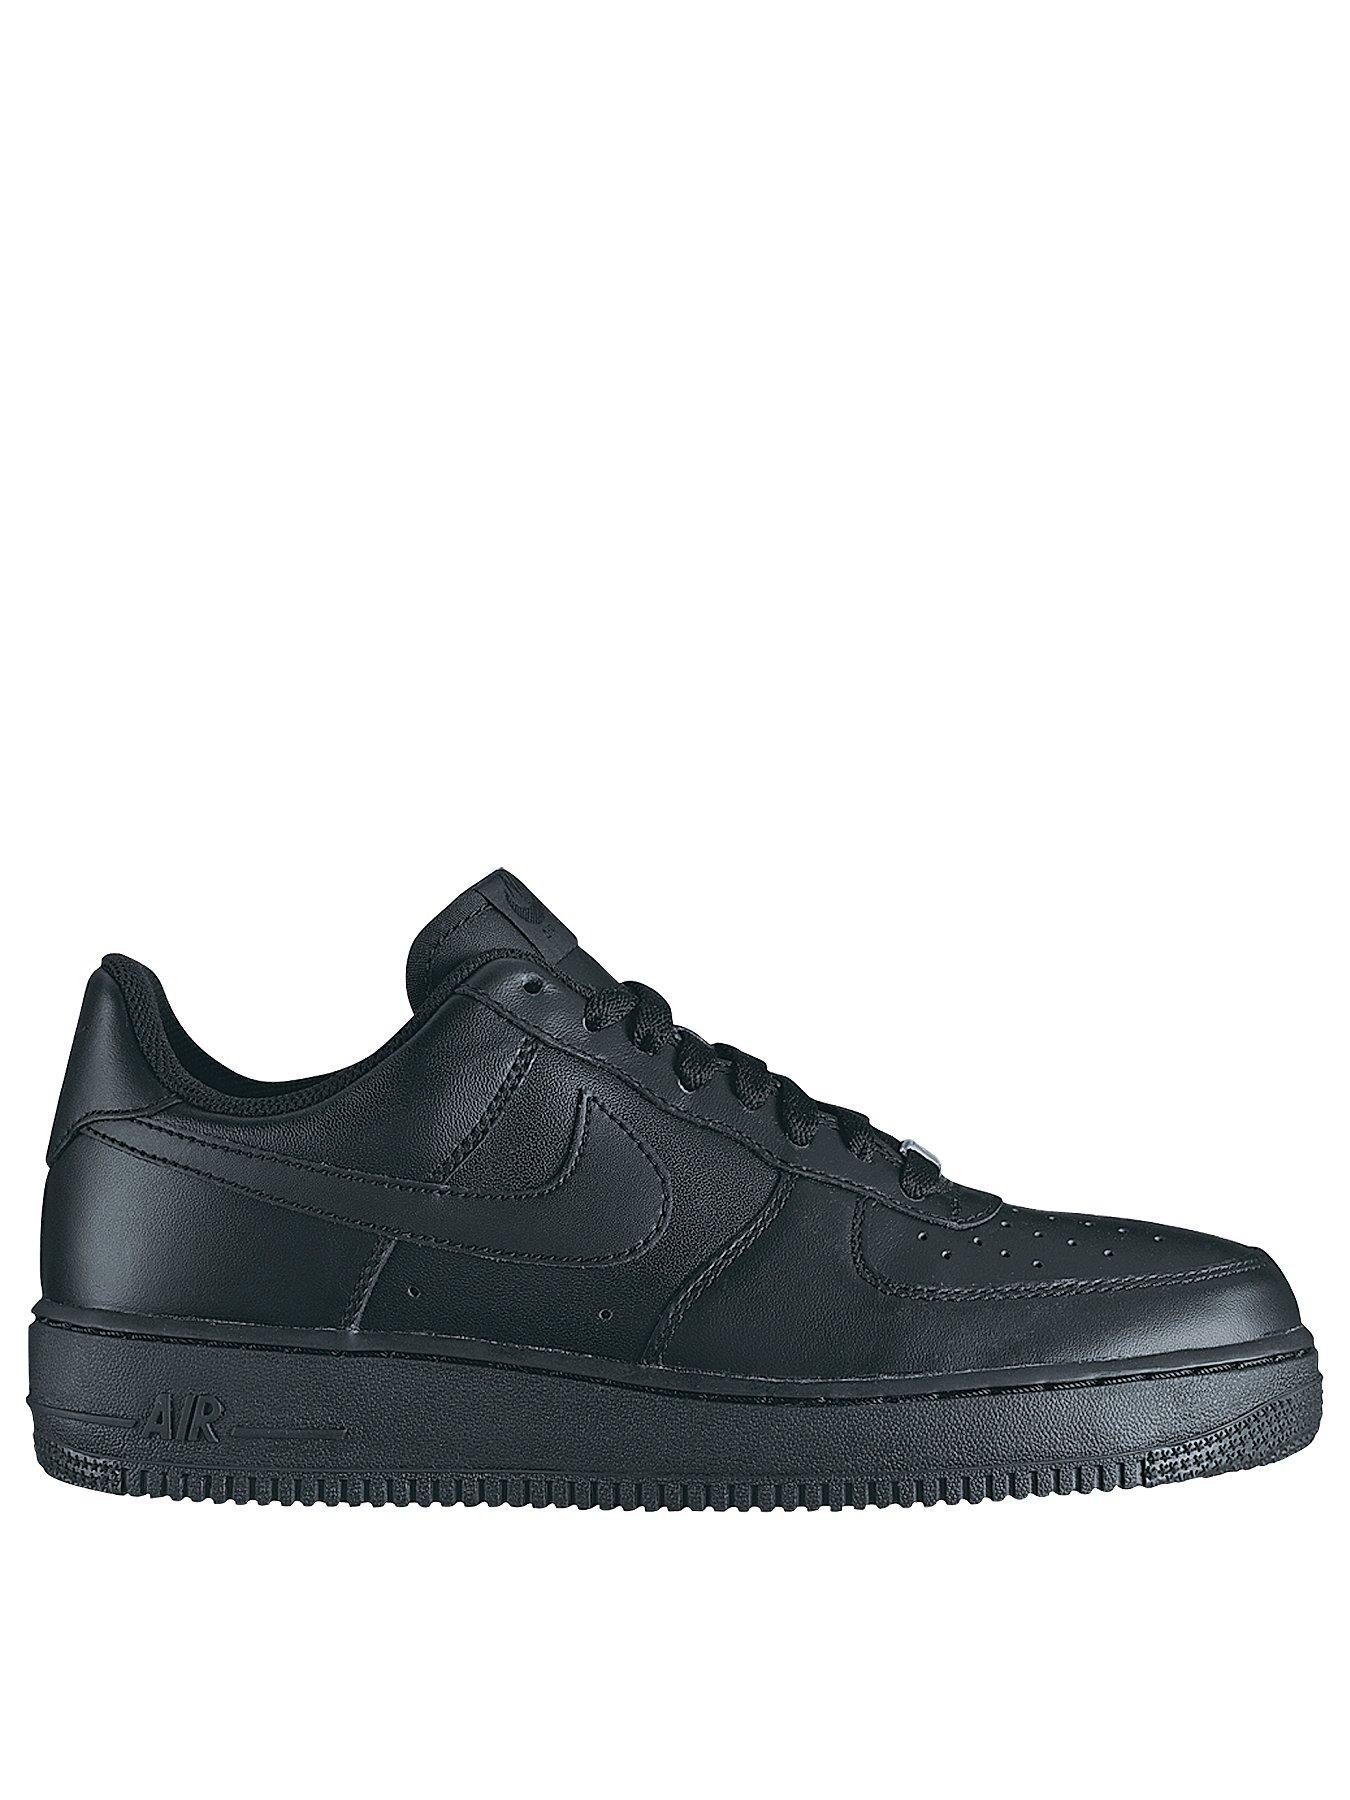 black size 6 air force 1